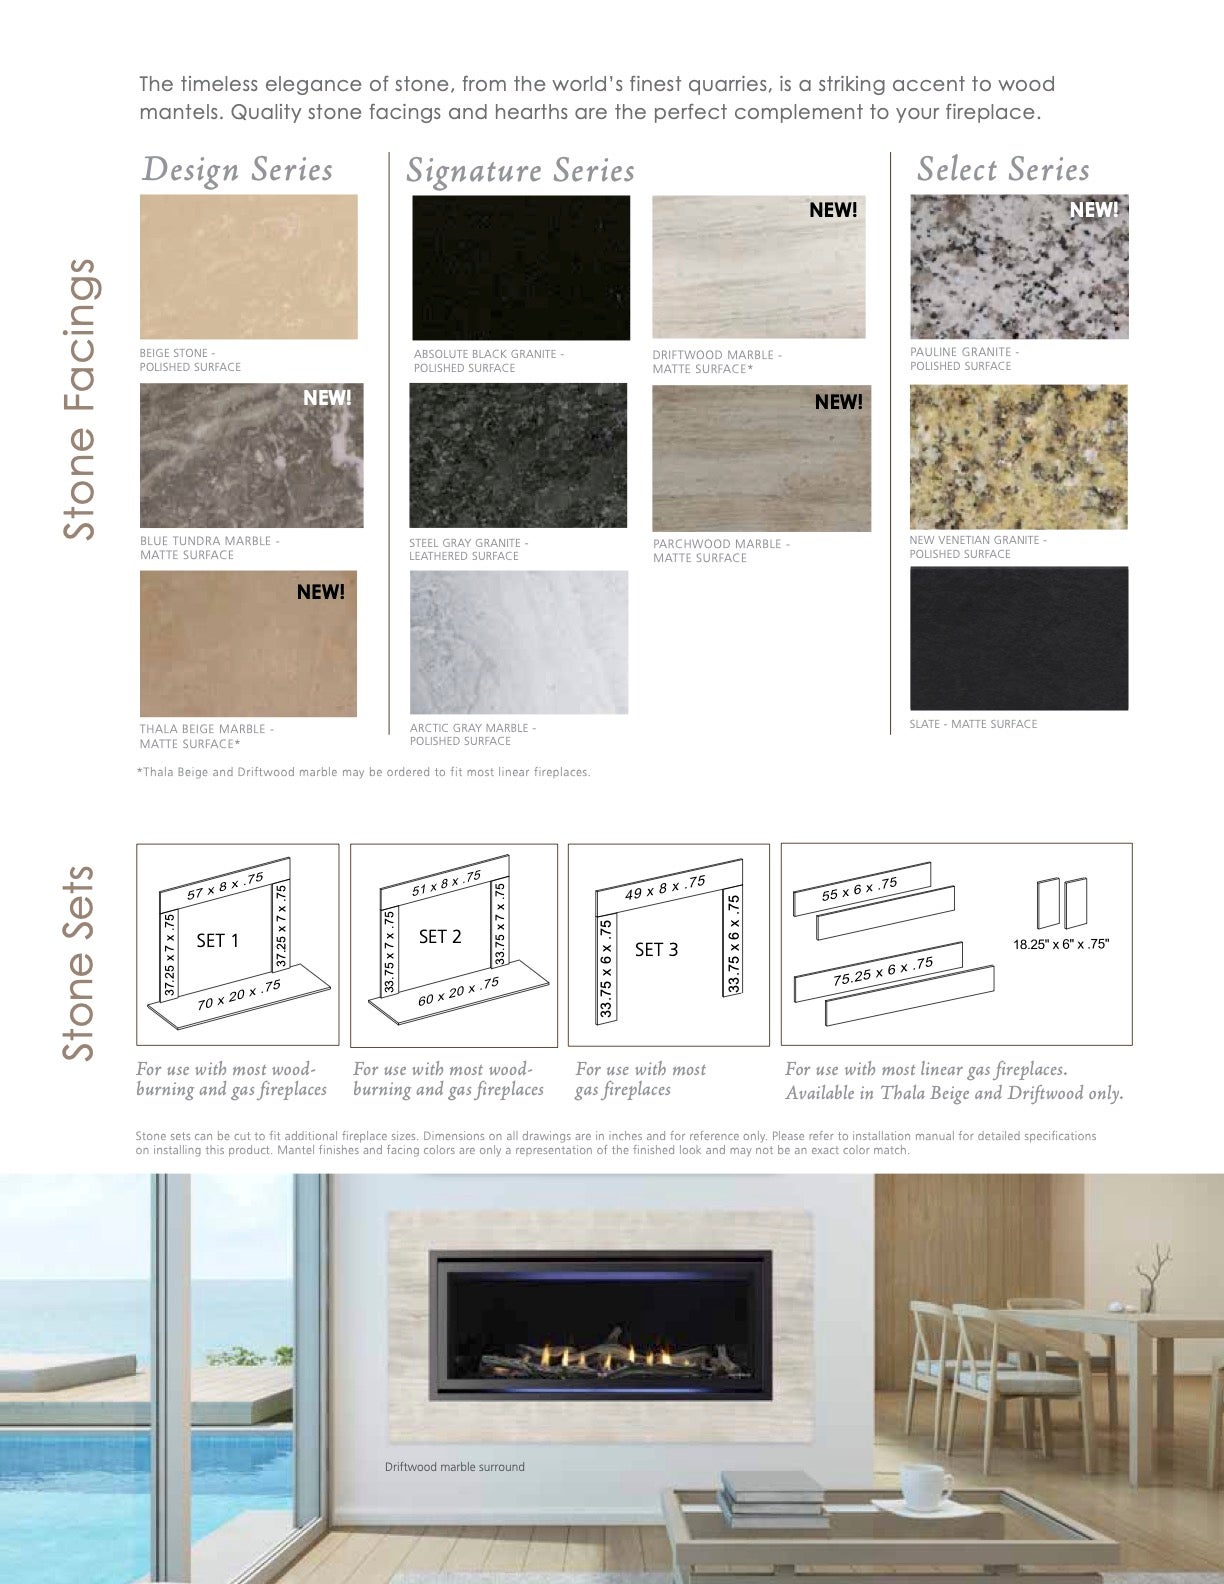 Mantelpieces & Surrounds Brochure at WilliamSmith Fireplaces in North Charleston SC